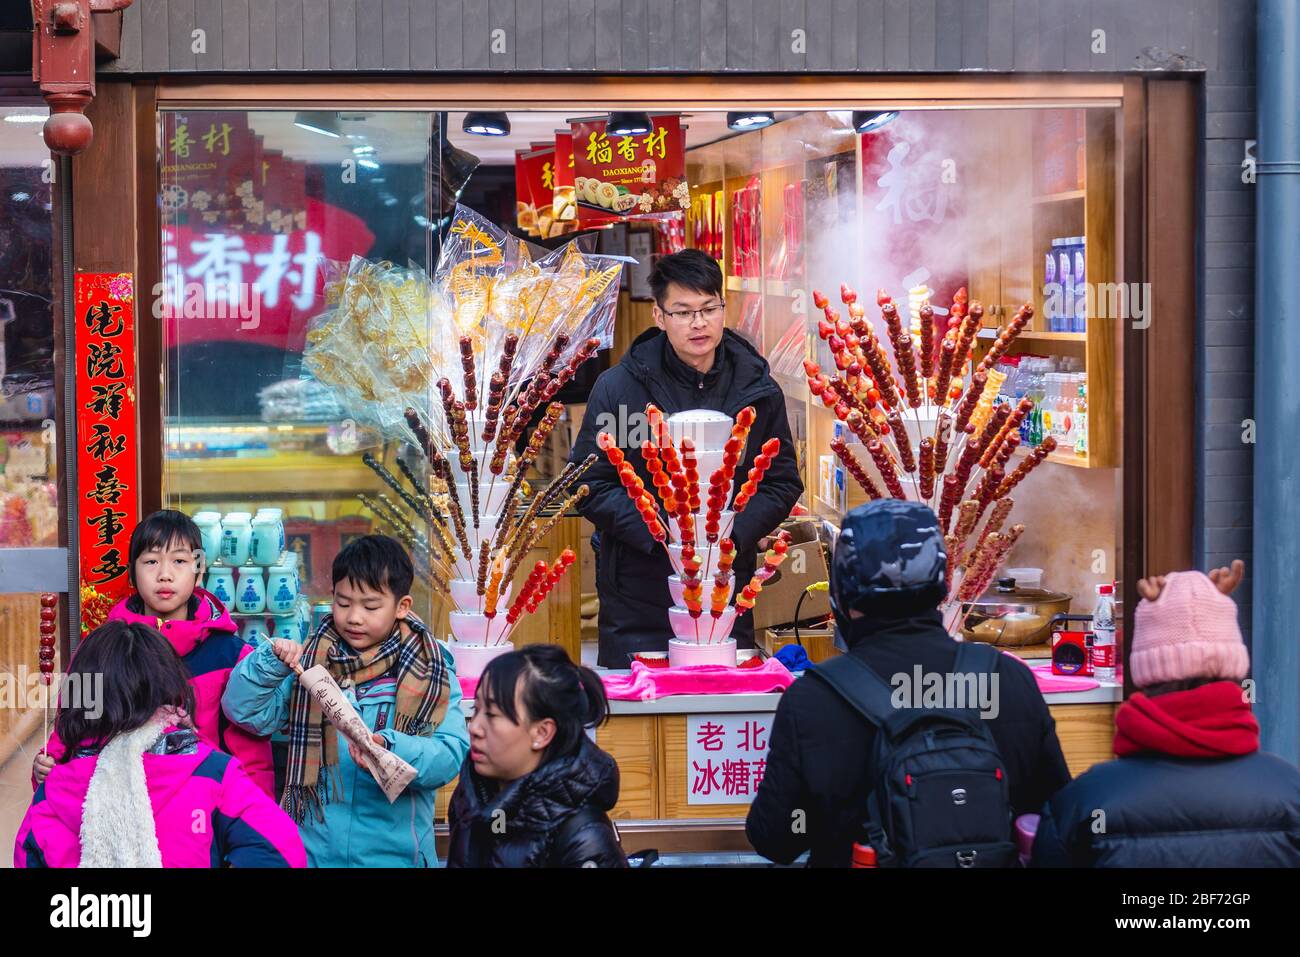 Confectionery with candied fruits for sale at Nanluoguxiang - famous commercial hutong in Beijing, China Stock Photo